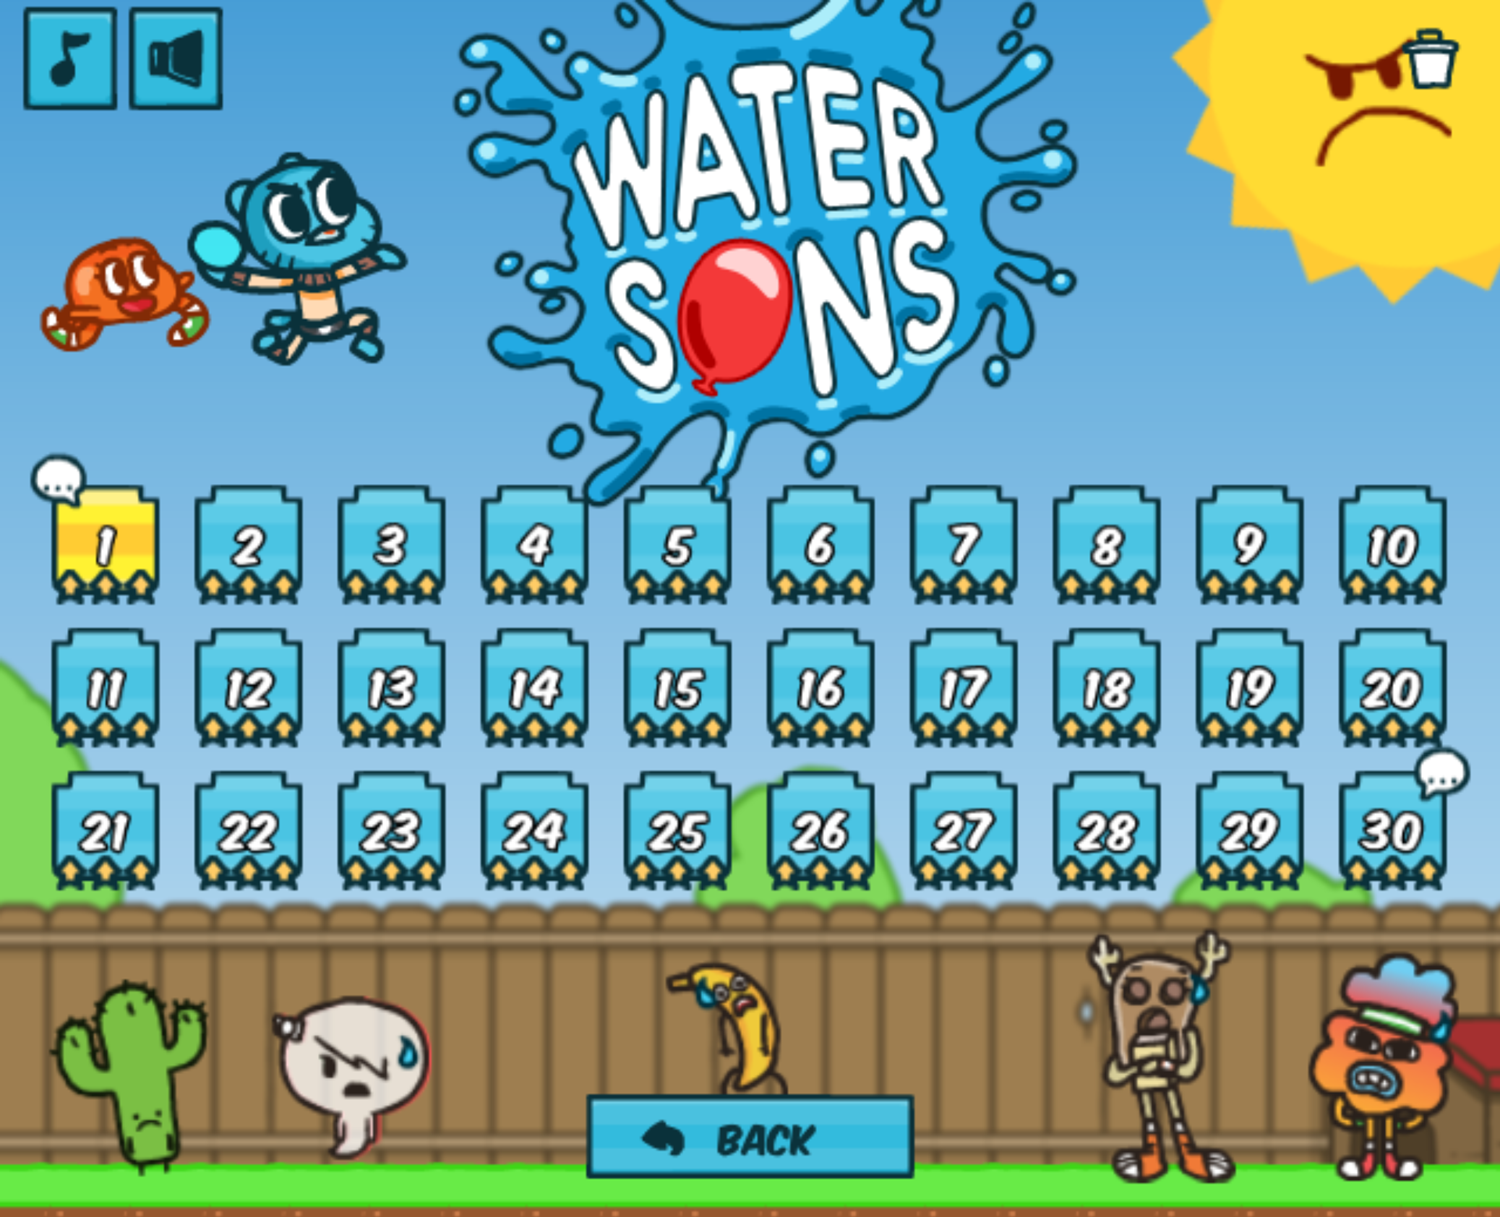 Amazing World of Gumball Water Sons Game Level Select Beat Screenshot.